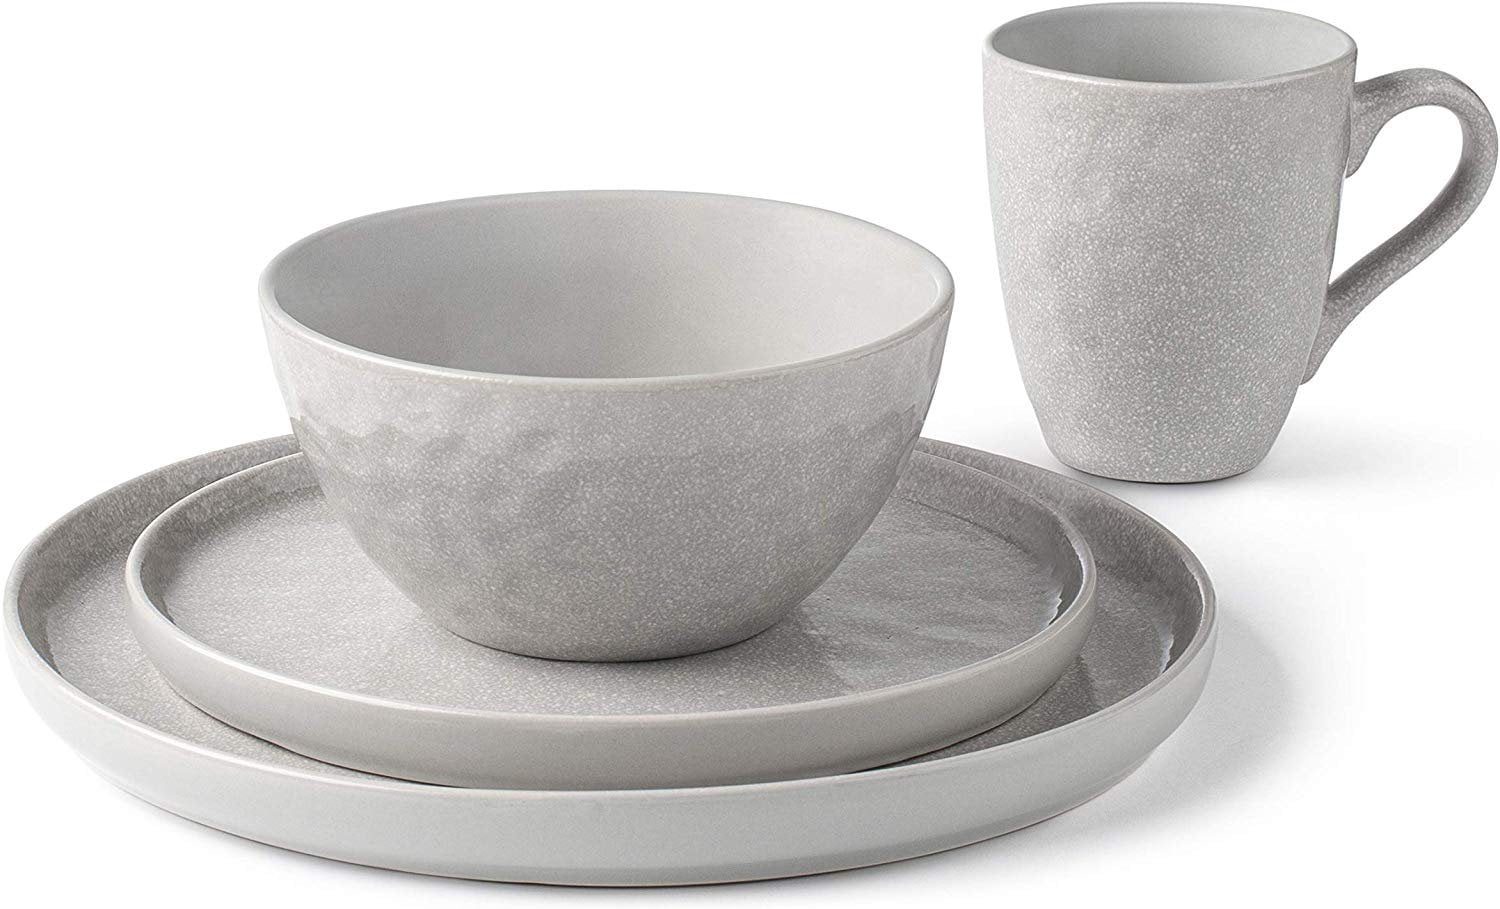 Set of 16 Stoneware Two Tone Grey White Reactive Salad Plate Cup Bowl Dinner Set